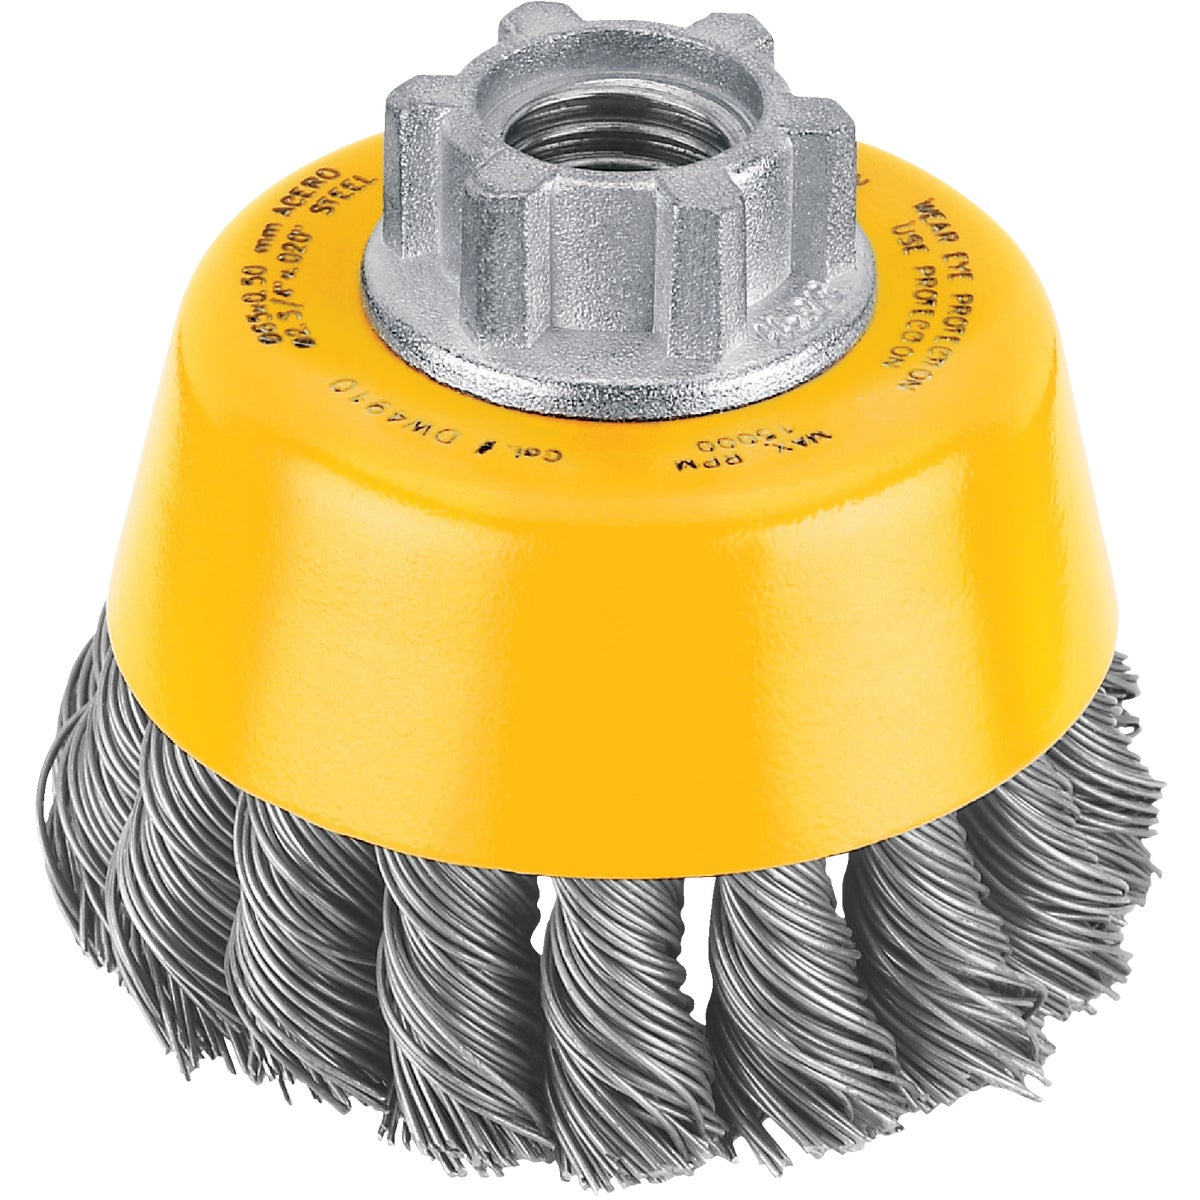 DEWALT 3 In. Knotted 0.020 In. Angle Grinder Wire Brush